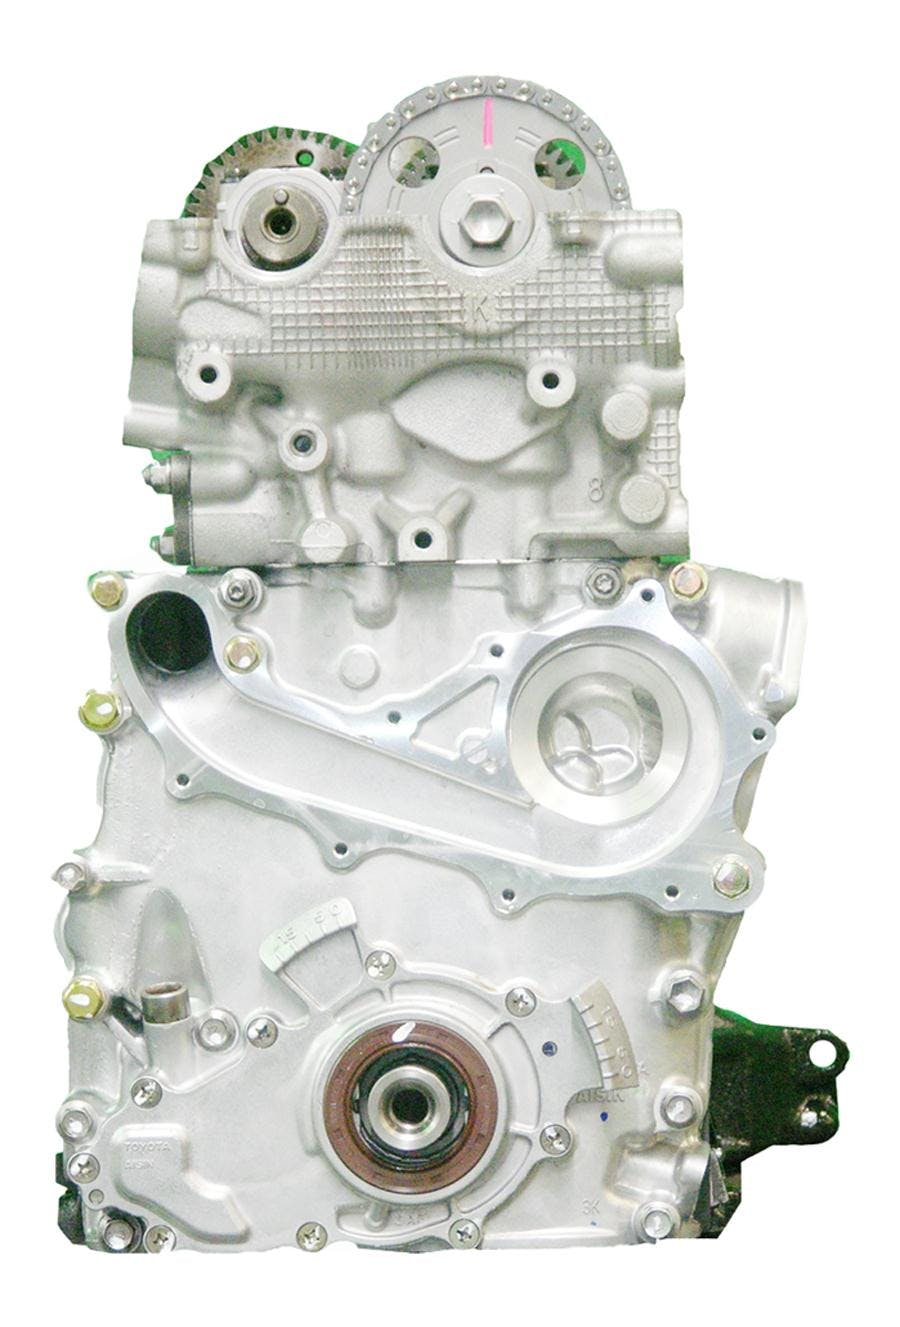 2.4L Inline-4 Engine for 2000-2004 Toyota Tacoma RWD